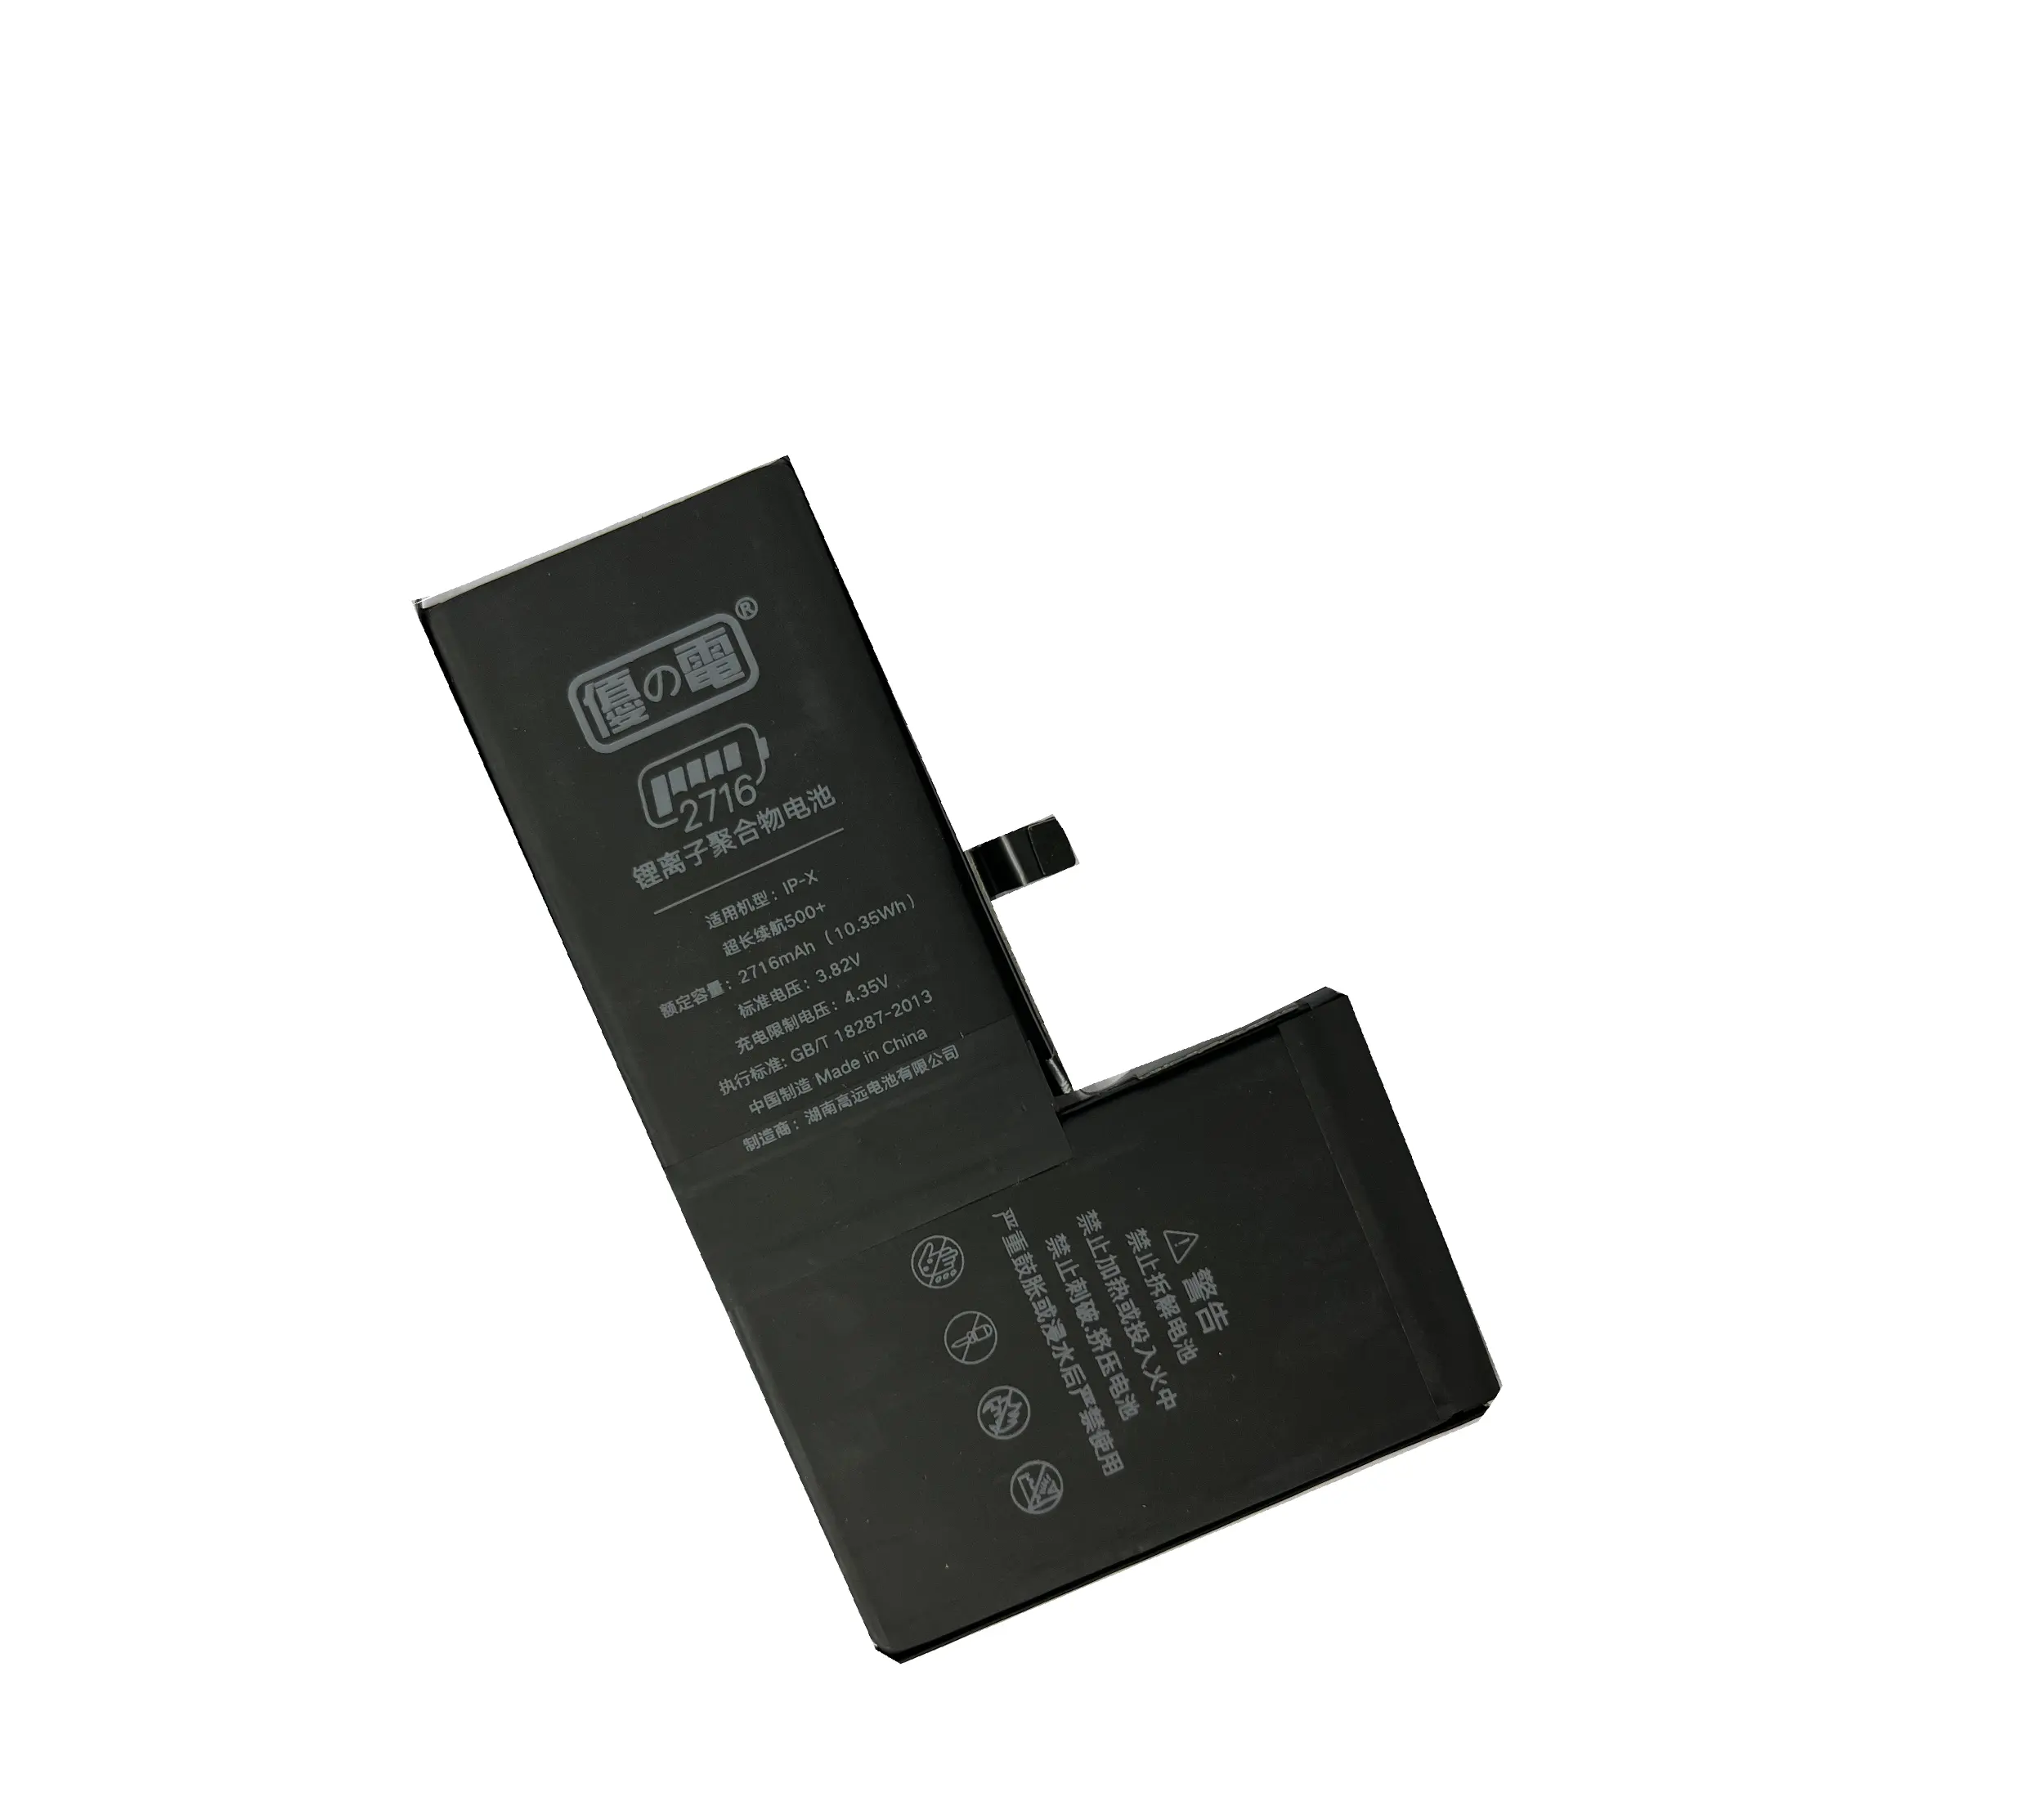 Mobile Cell Phone Battery Smartphone Battery Used For Iphone 6 6s x xr xs xs max se2 7 7p 7s 8 8s 8p Replacement phone battery